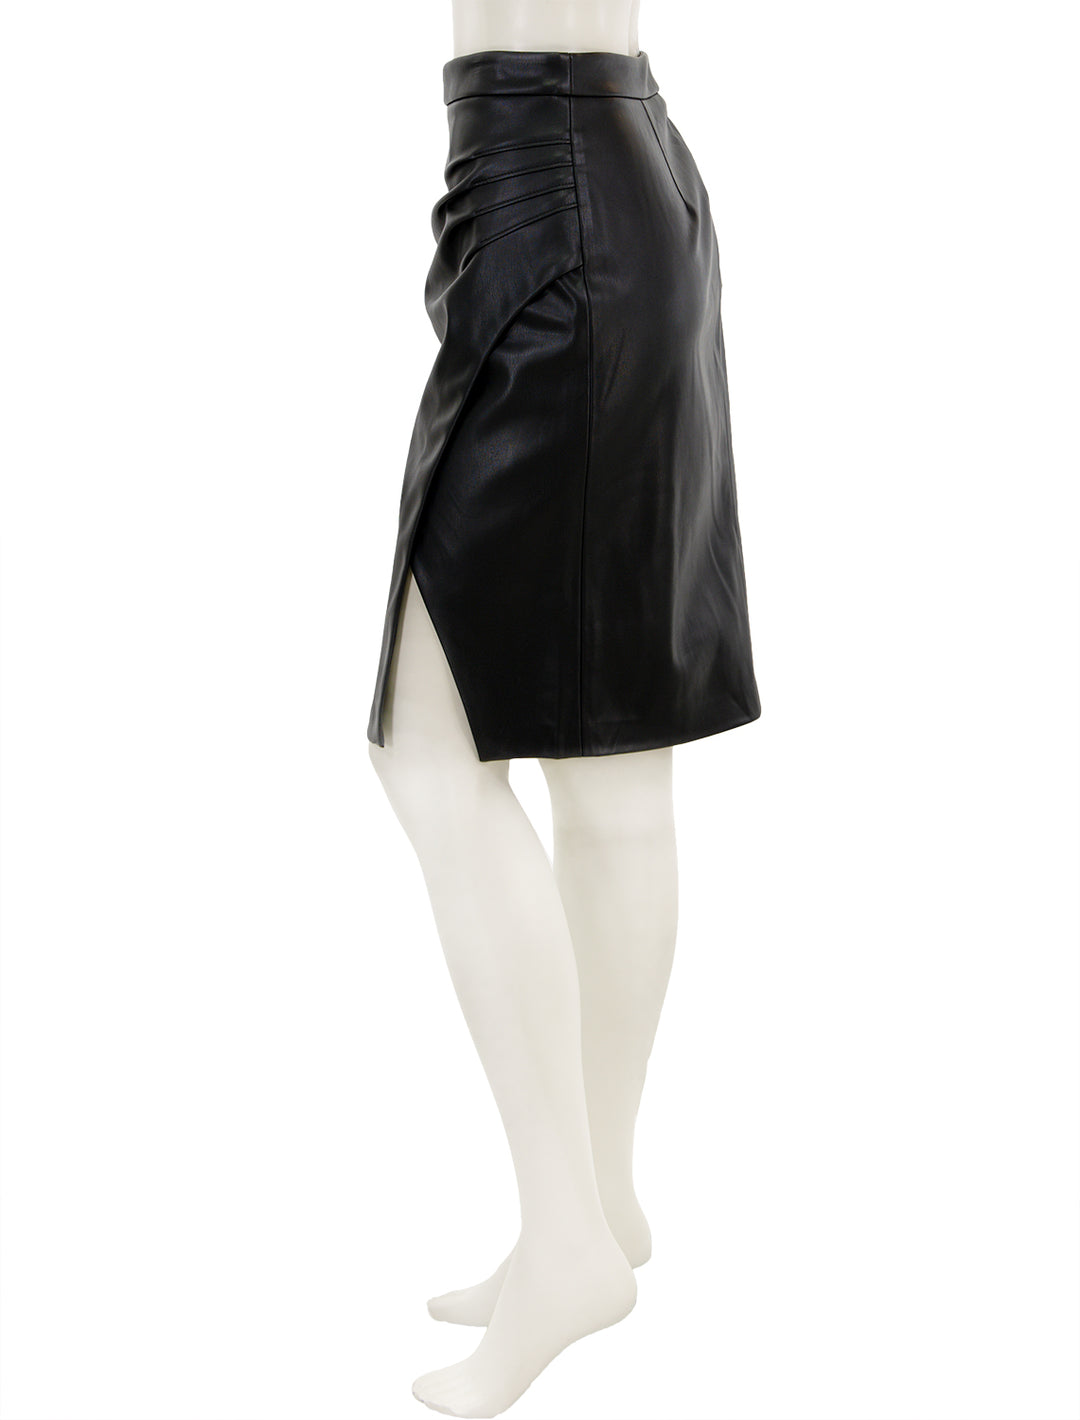 Side view of L'agence's maude pencil skirt.